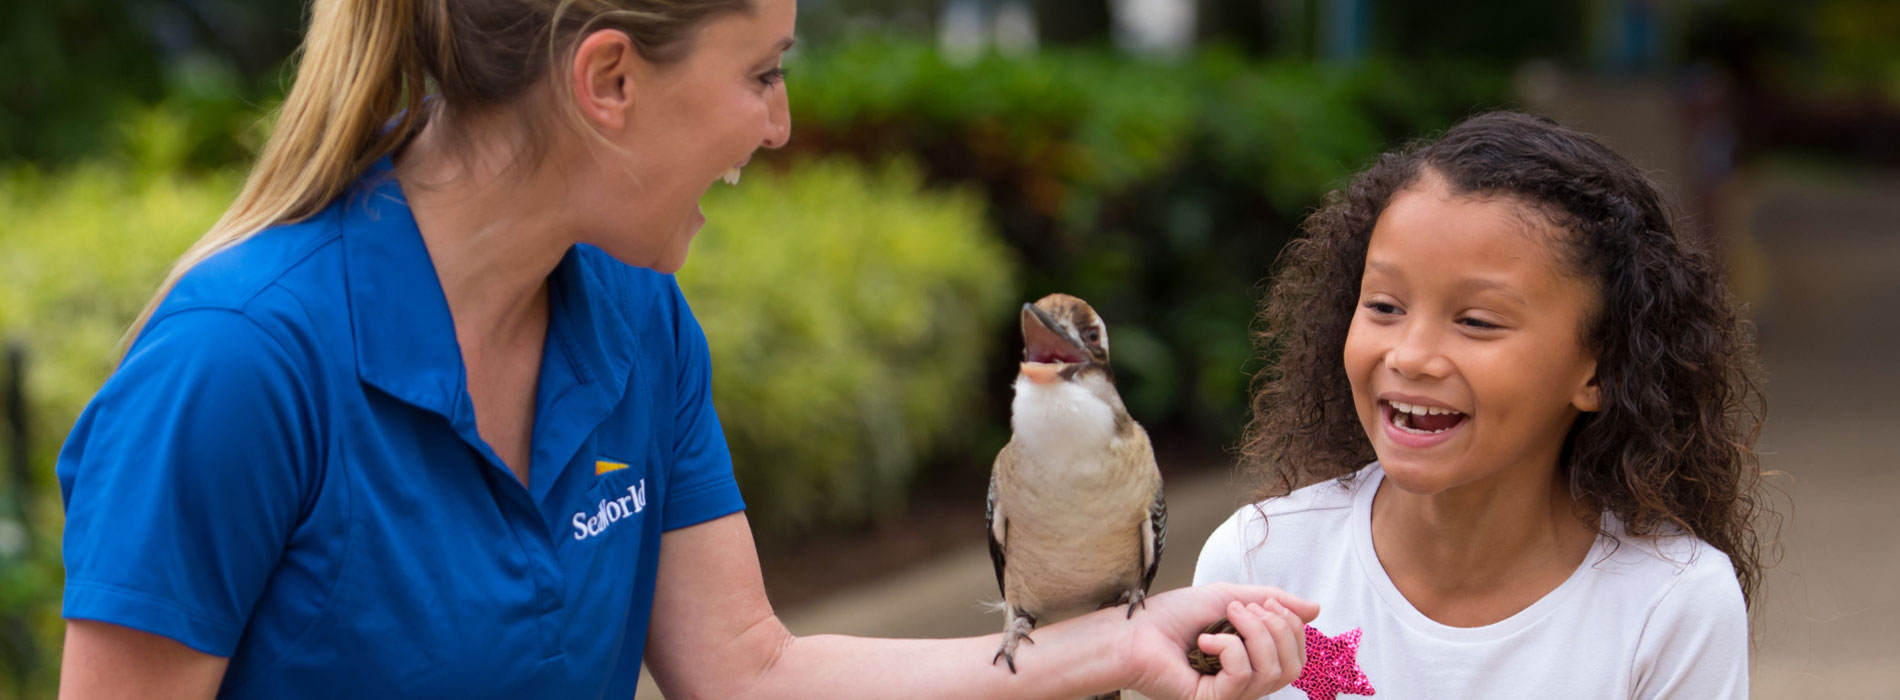 Girl making connection with a bird at SeaWorld.